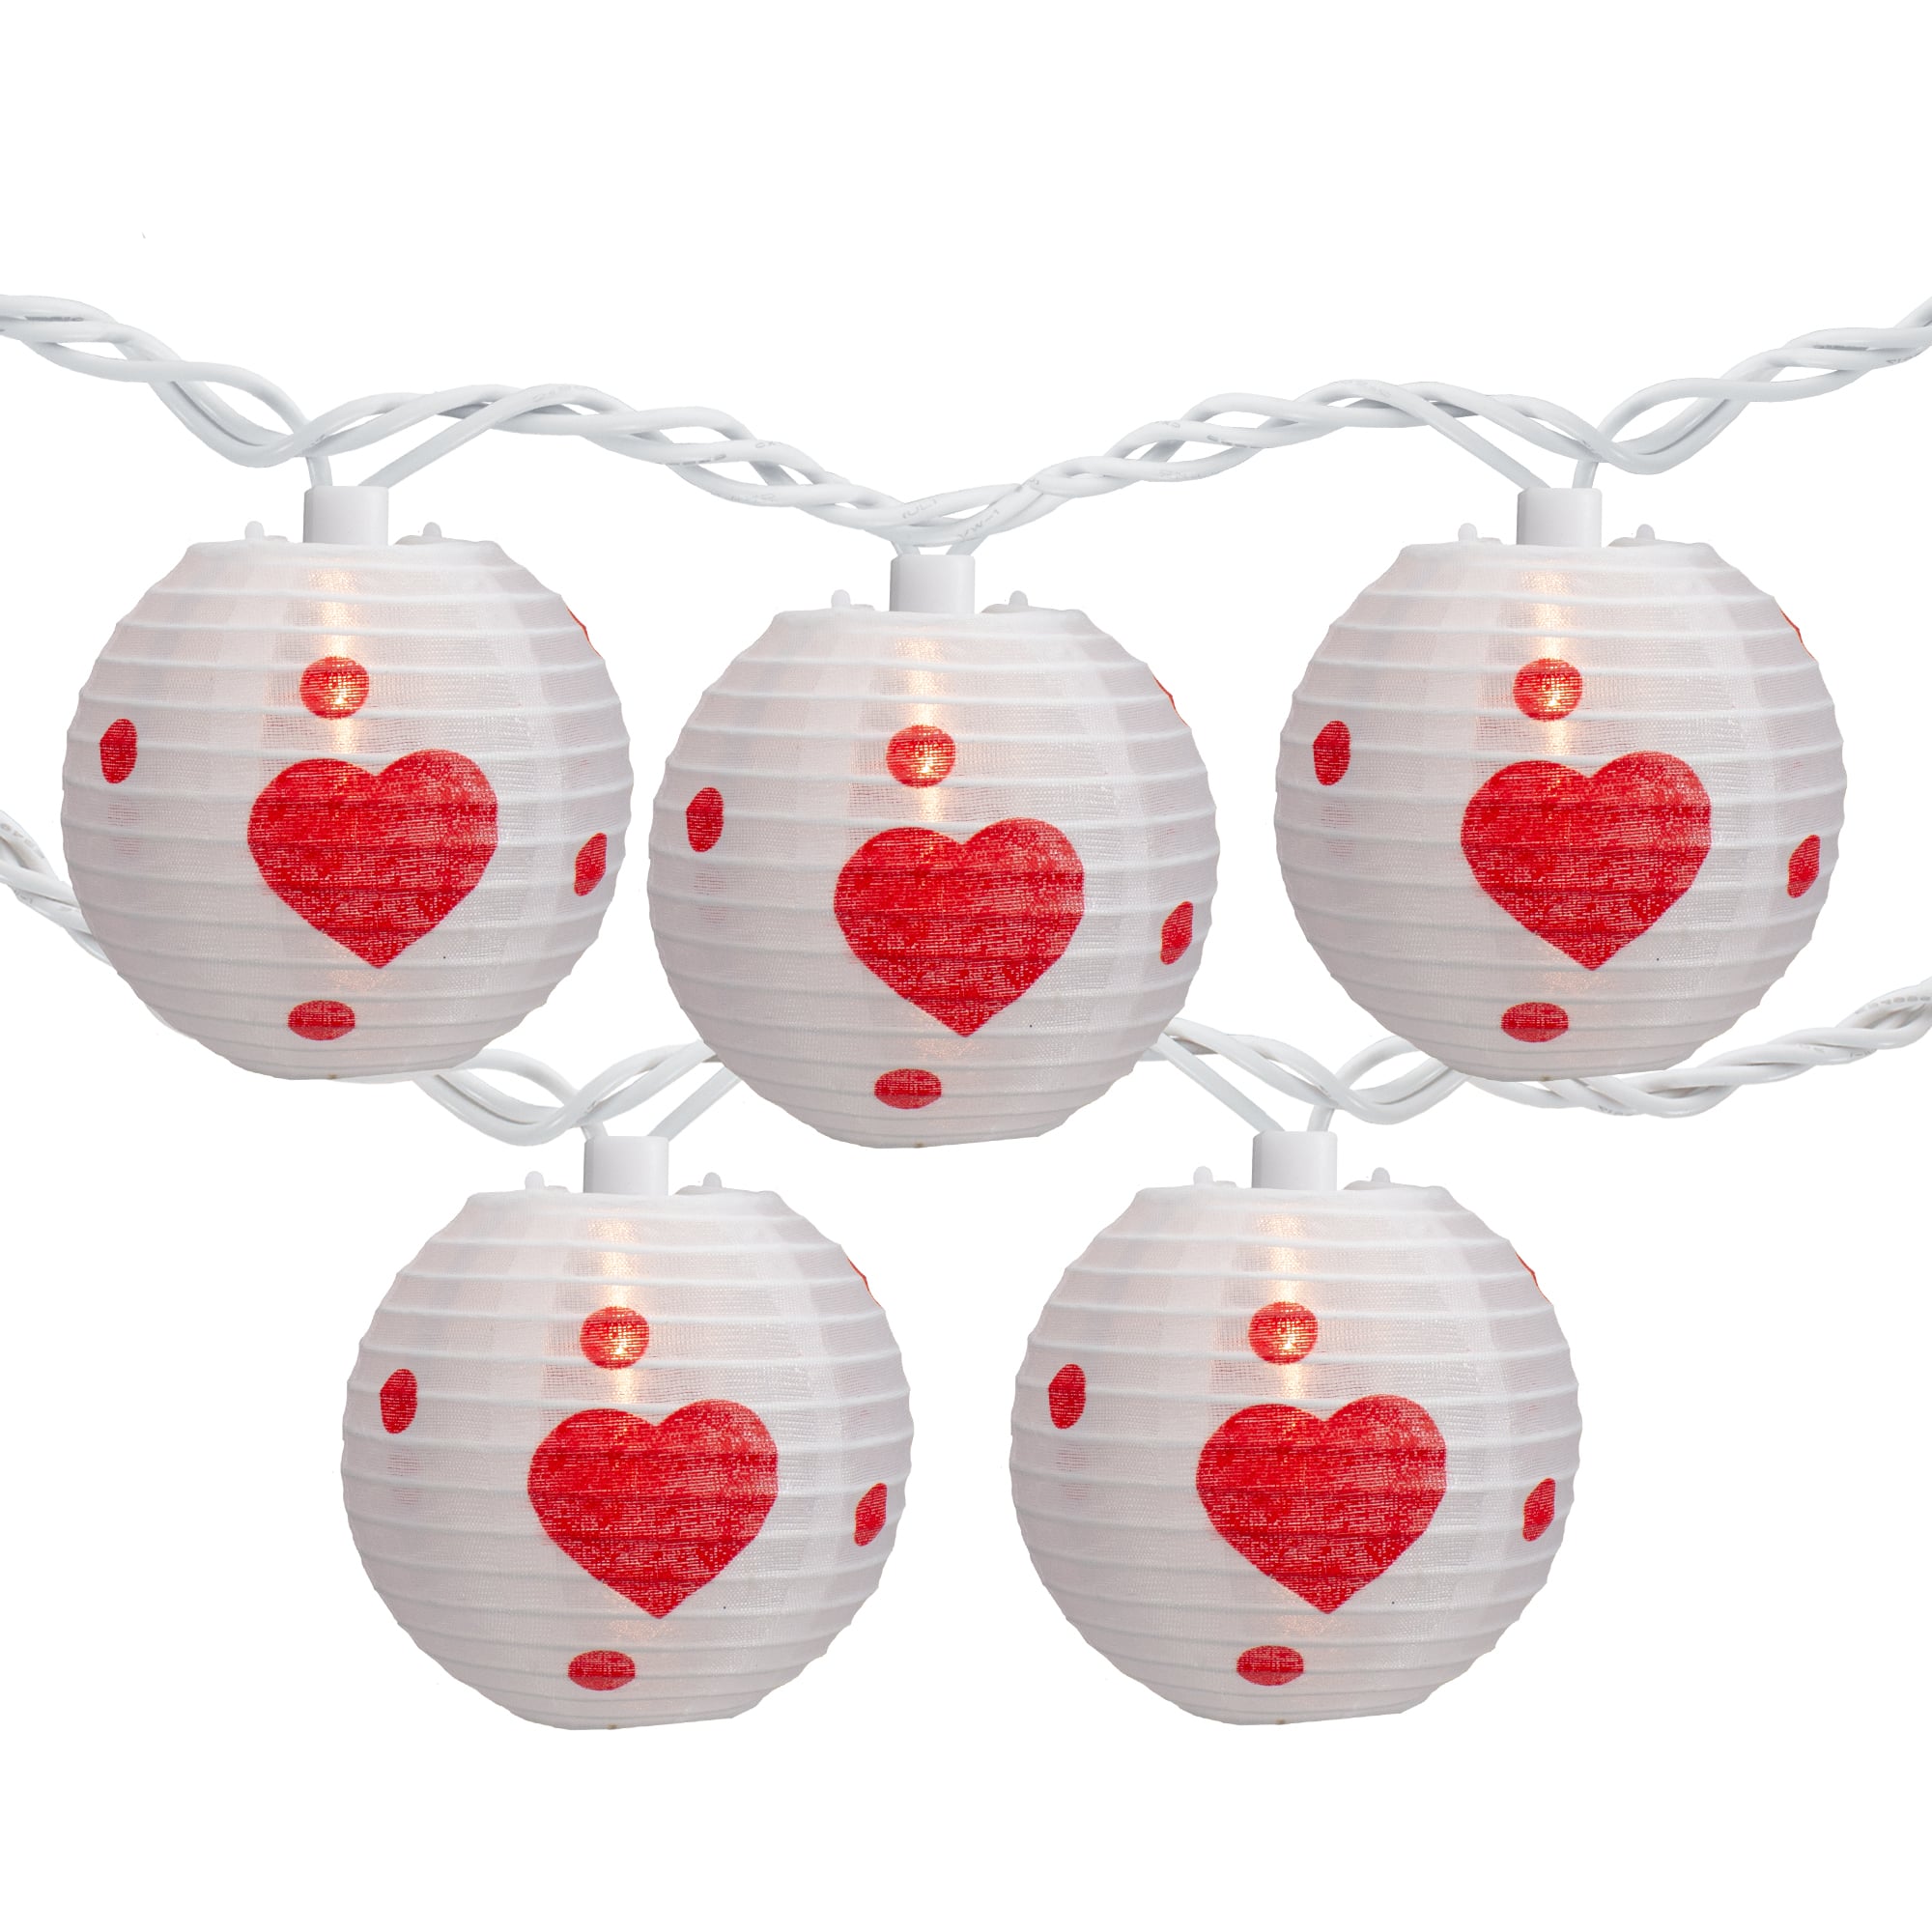 10-Count White and Red Heart Paper Lantern Valentine&#x27;s Day Lights 8.5ft White Wire